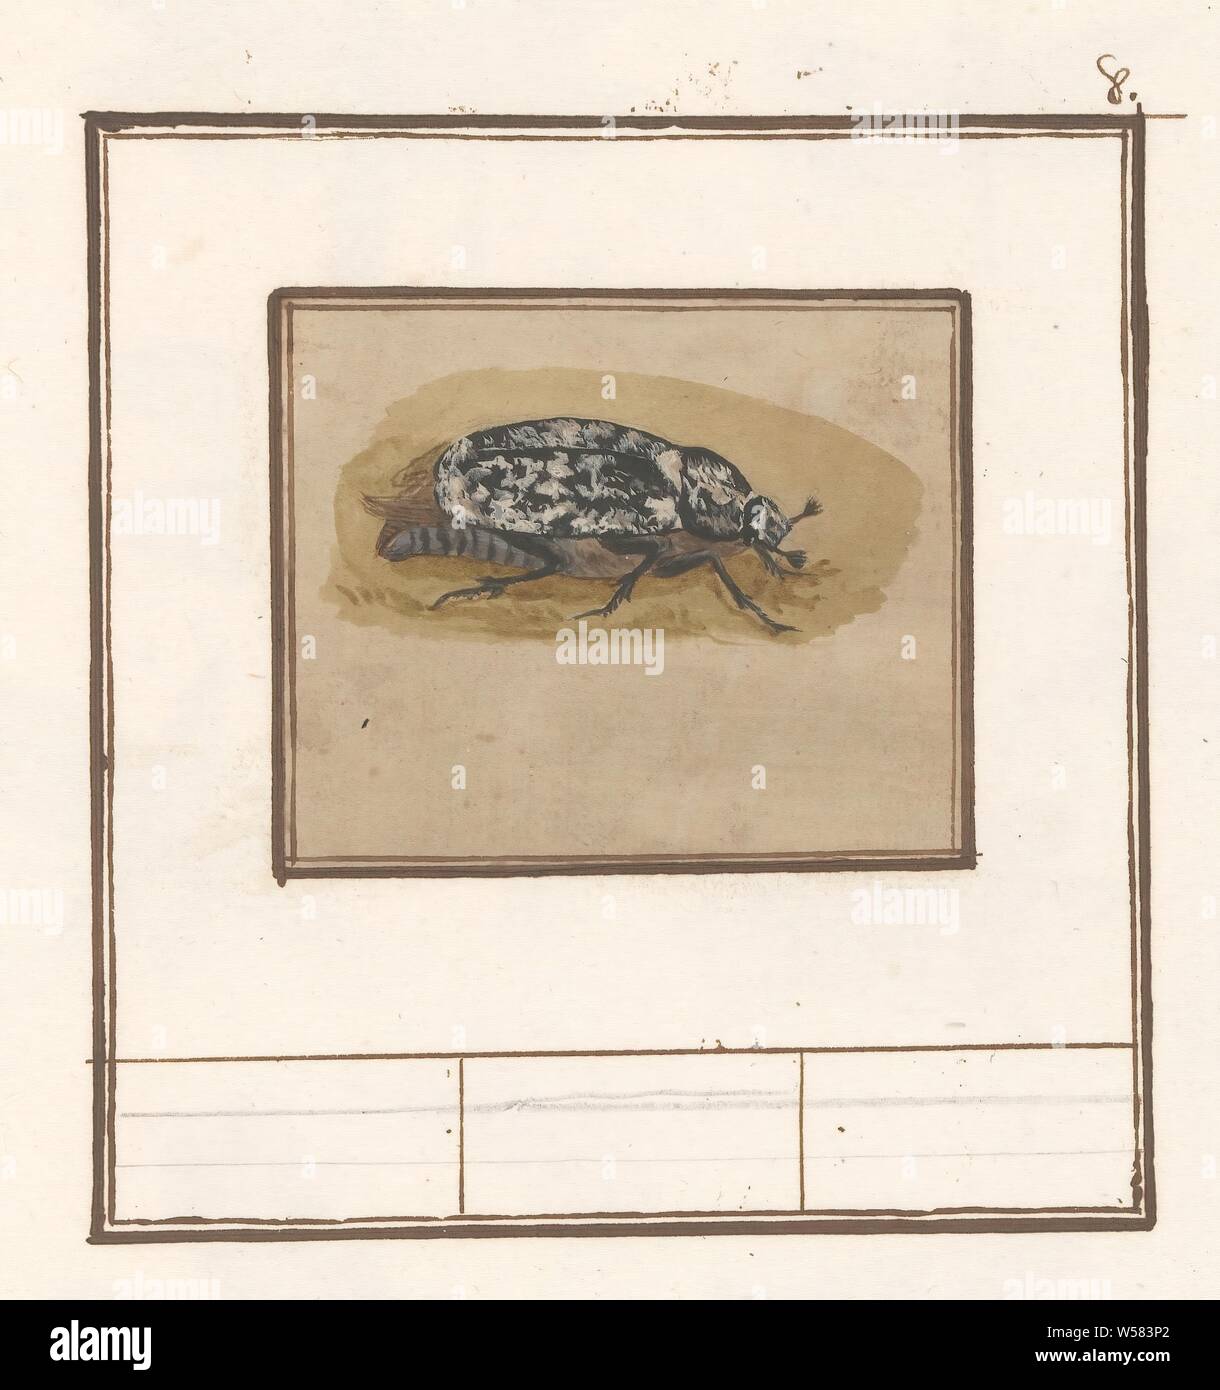 Cockchafer (Polyphylla fullo), Cockchafer. Numbered top right on the sheet: 8. Part of the sixth album with drawings of fish, shells and insects. Sixth of twelve albums with drawings of animals, birds and plants known around 1600, commissioned by Emperor Rudolf II. With explanations in Dutch, Latin and French, insects: scarabaeus, Anselmus Boetius de Boodt, Praag, 1596 - 1610, paper, pencil, chalk, watercolor (paint), deck paint, brush, h 67 mm × w 81 mm Stock Photo